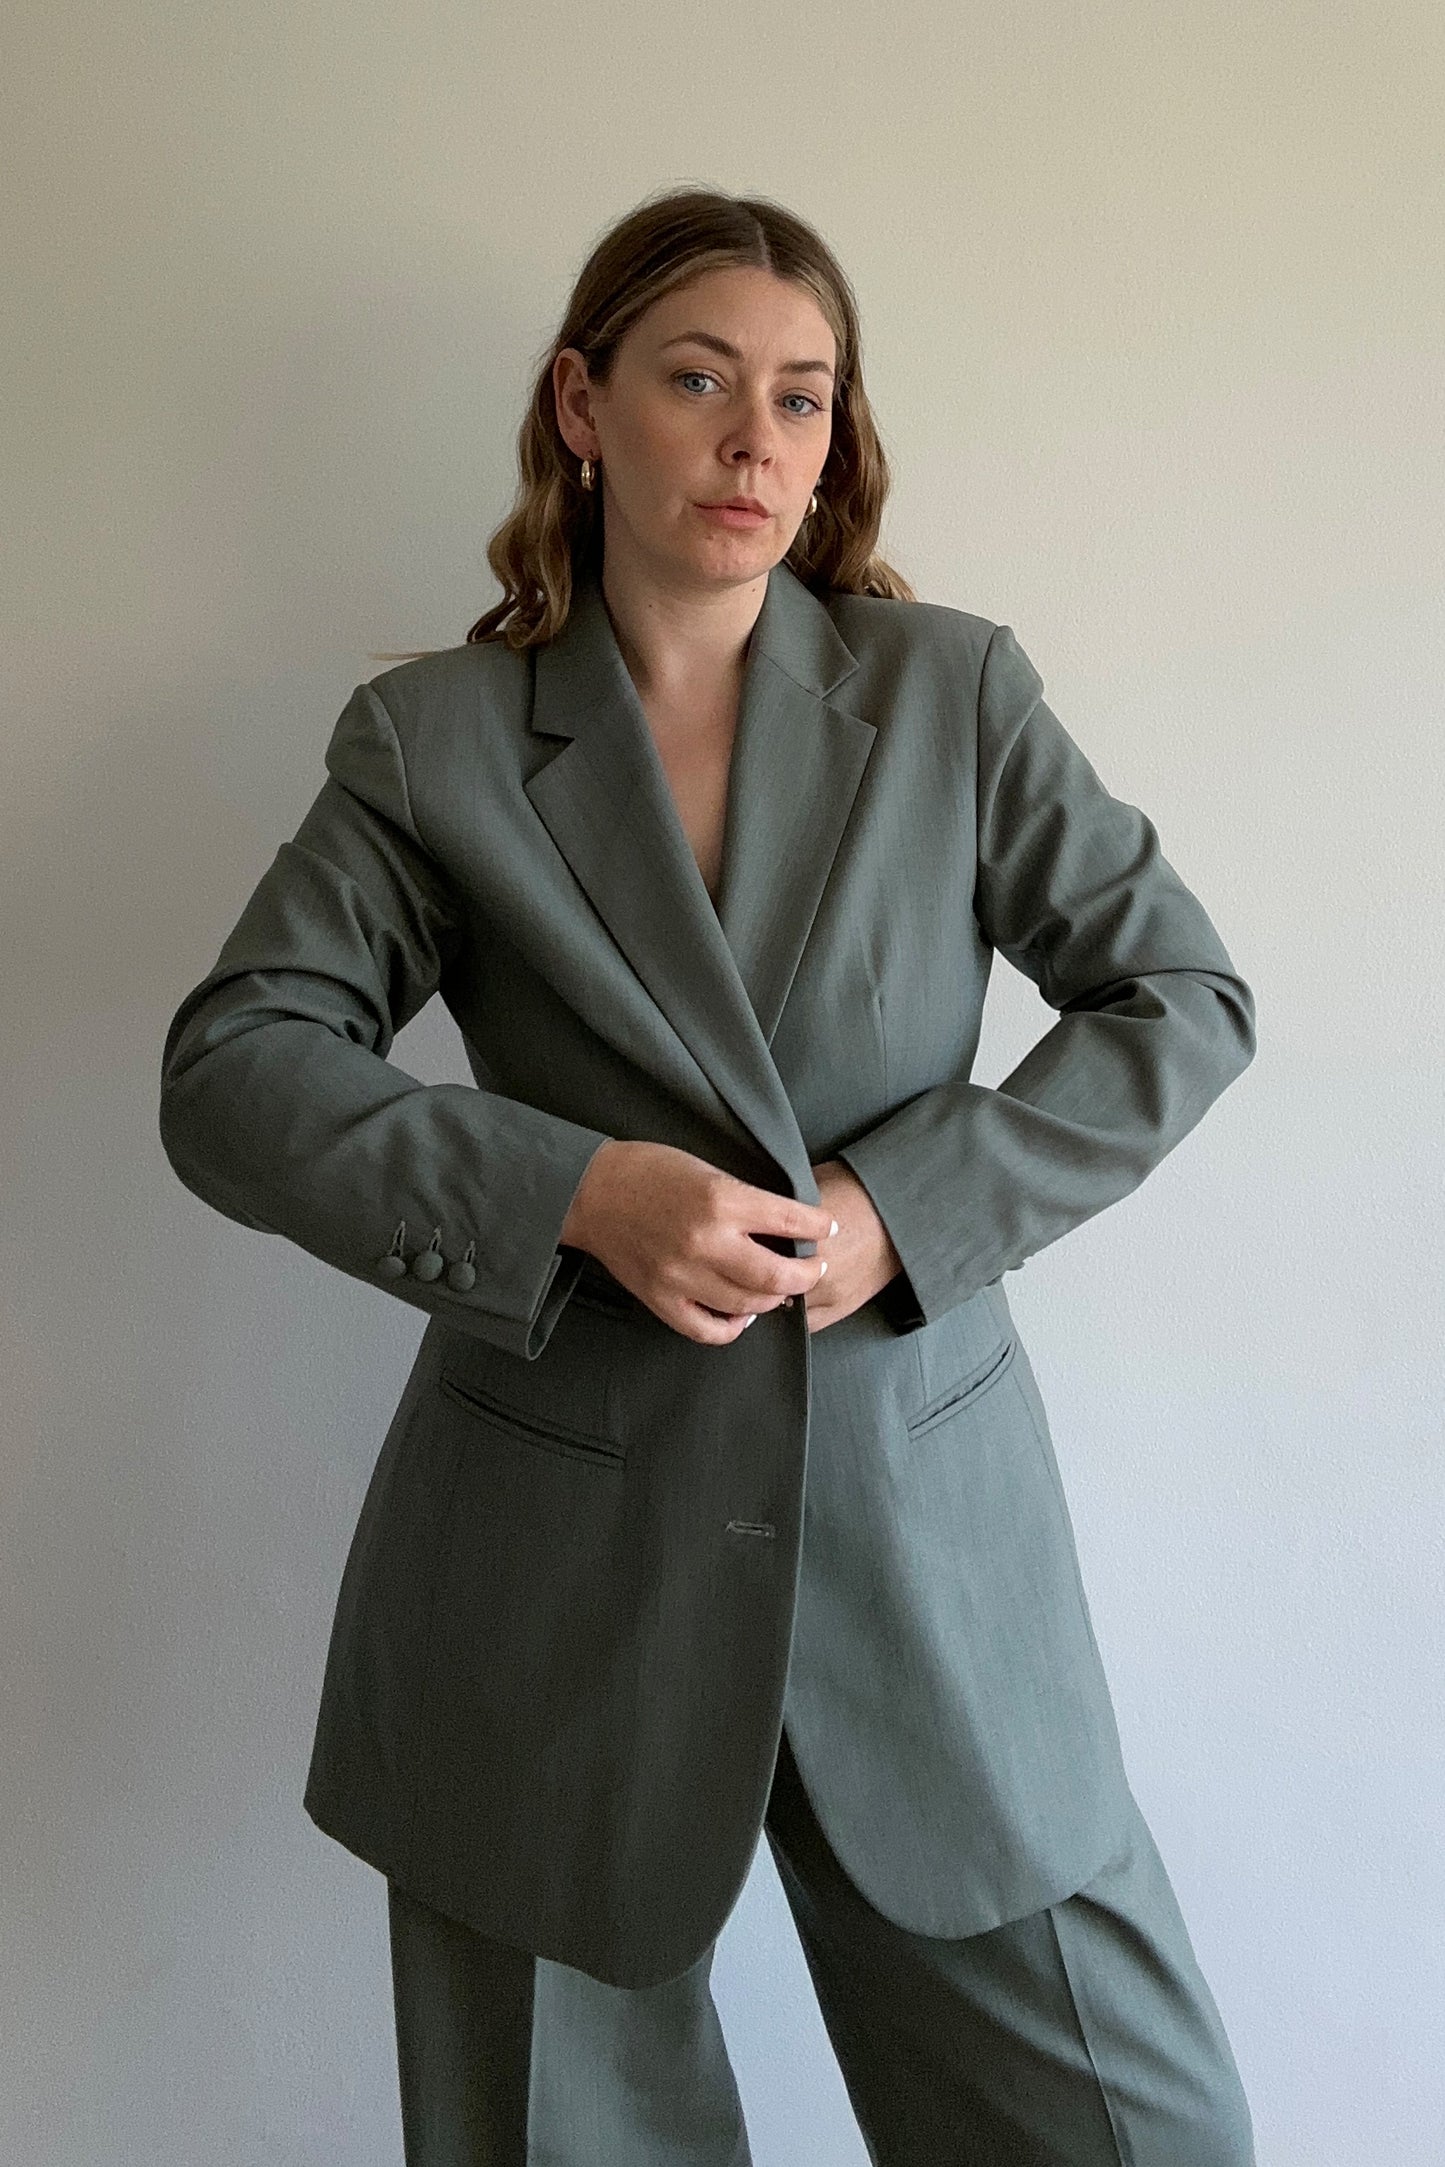 RENT: VINTAGE TAILORED HIGH-WAIST TROUSER SUIT — from £39.75 per week